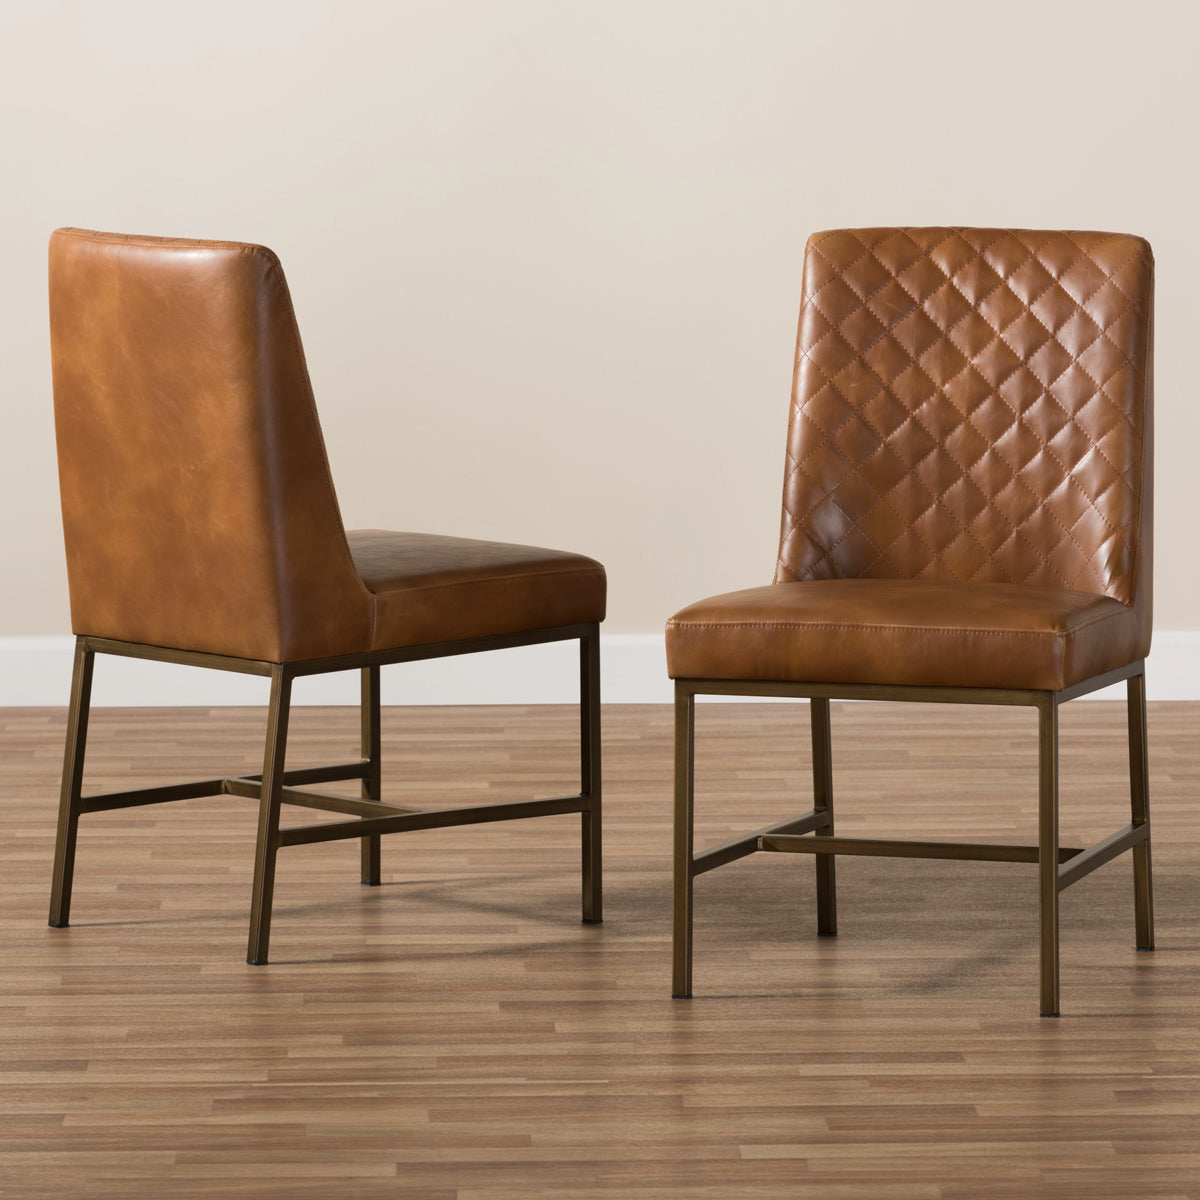 Baxton Studio Margaux Modern Luxe Light Brown Faux Leather Upholstered Dining Chair (Set of 2) Baxton Studio-dining chair-Minimal And Modern - 7